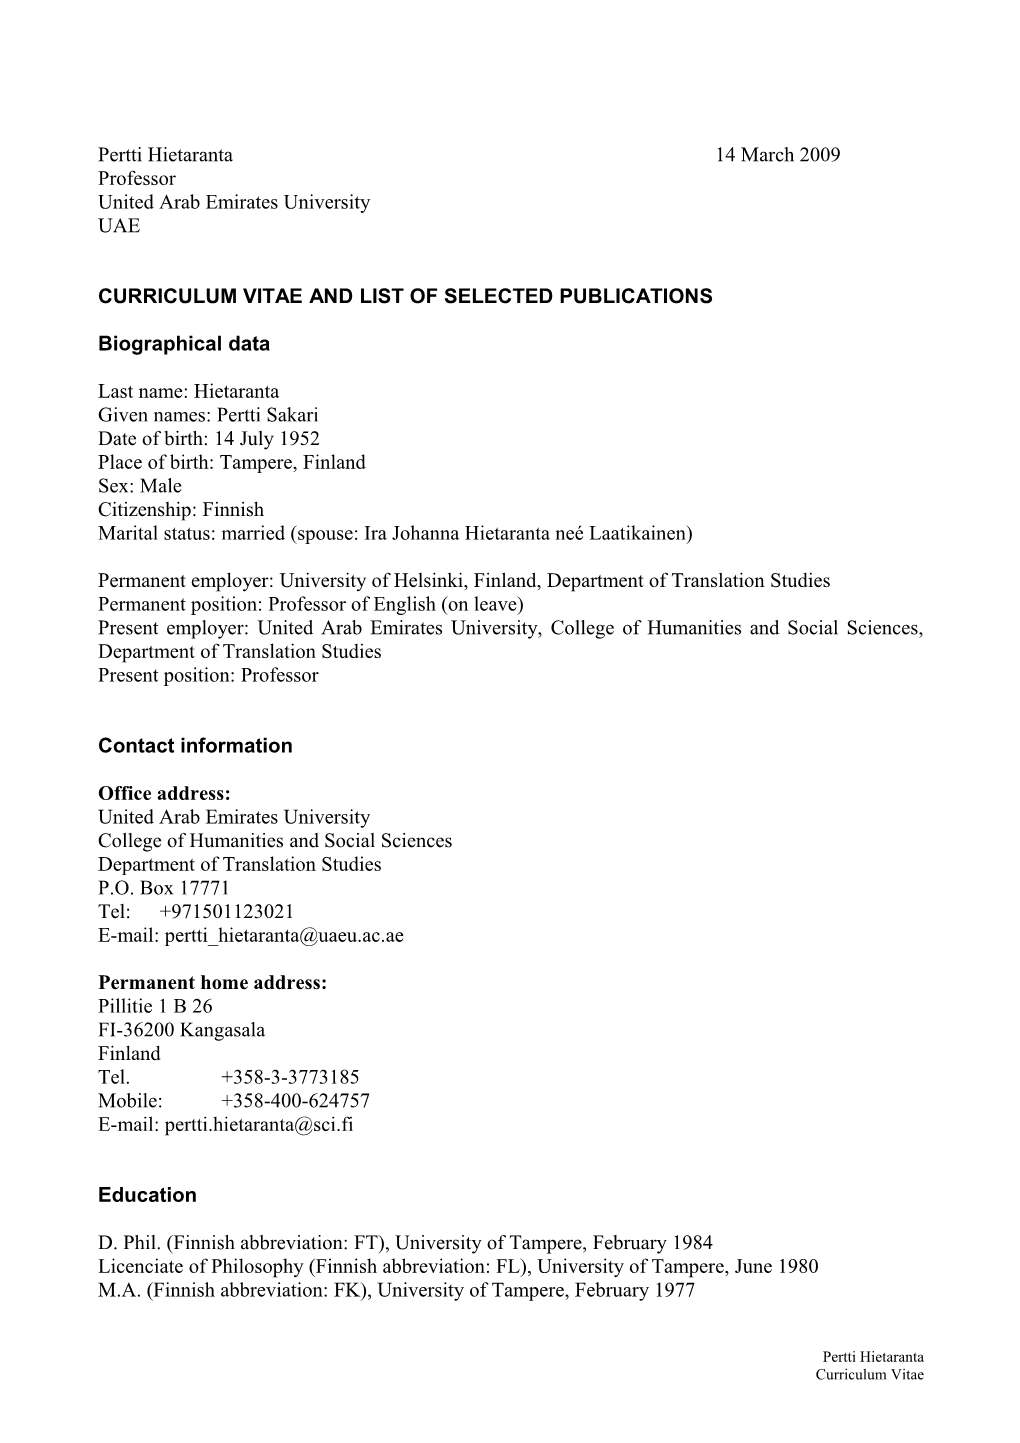 Curriculum Vitae and List of Selected Publications